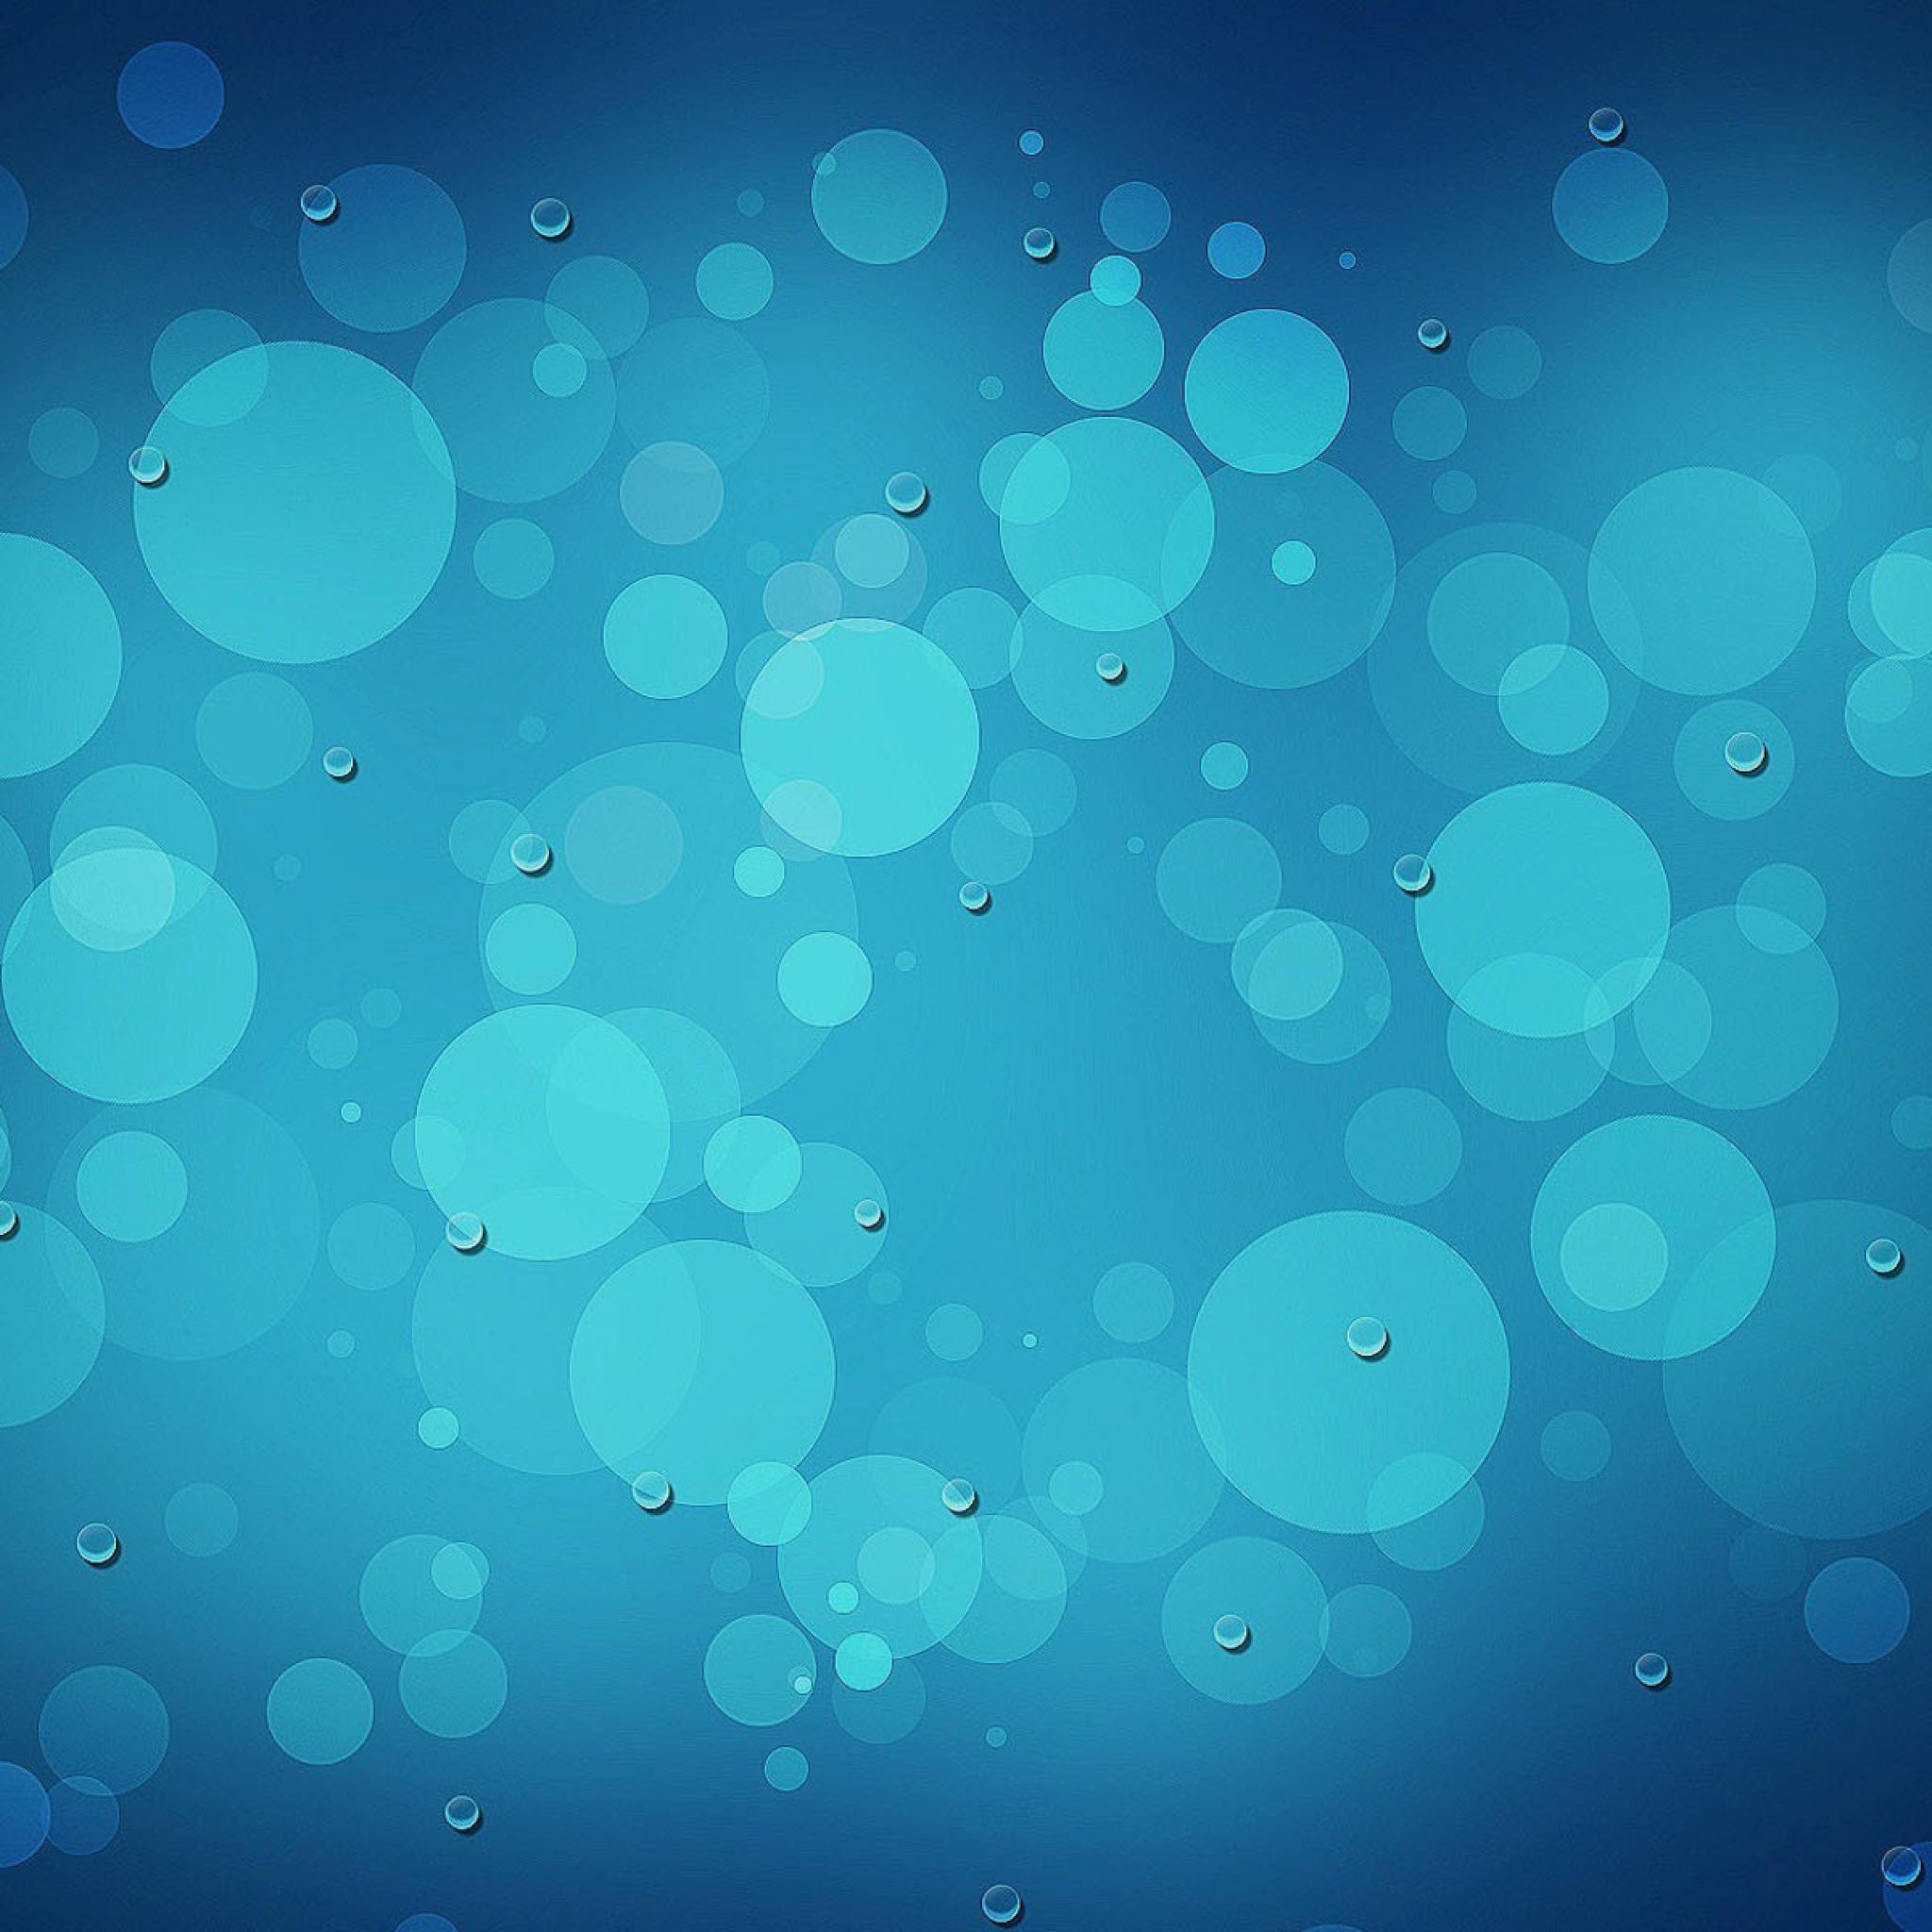 Wallpaper Blue Circles Background Drop Hq Wallpapers For Pc Ipad タブレット壁紙ギャラリー